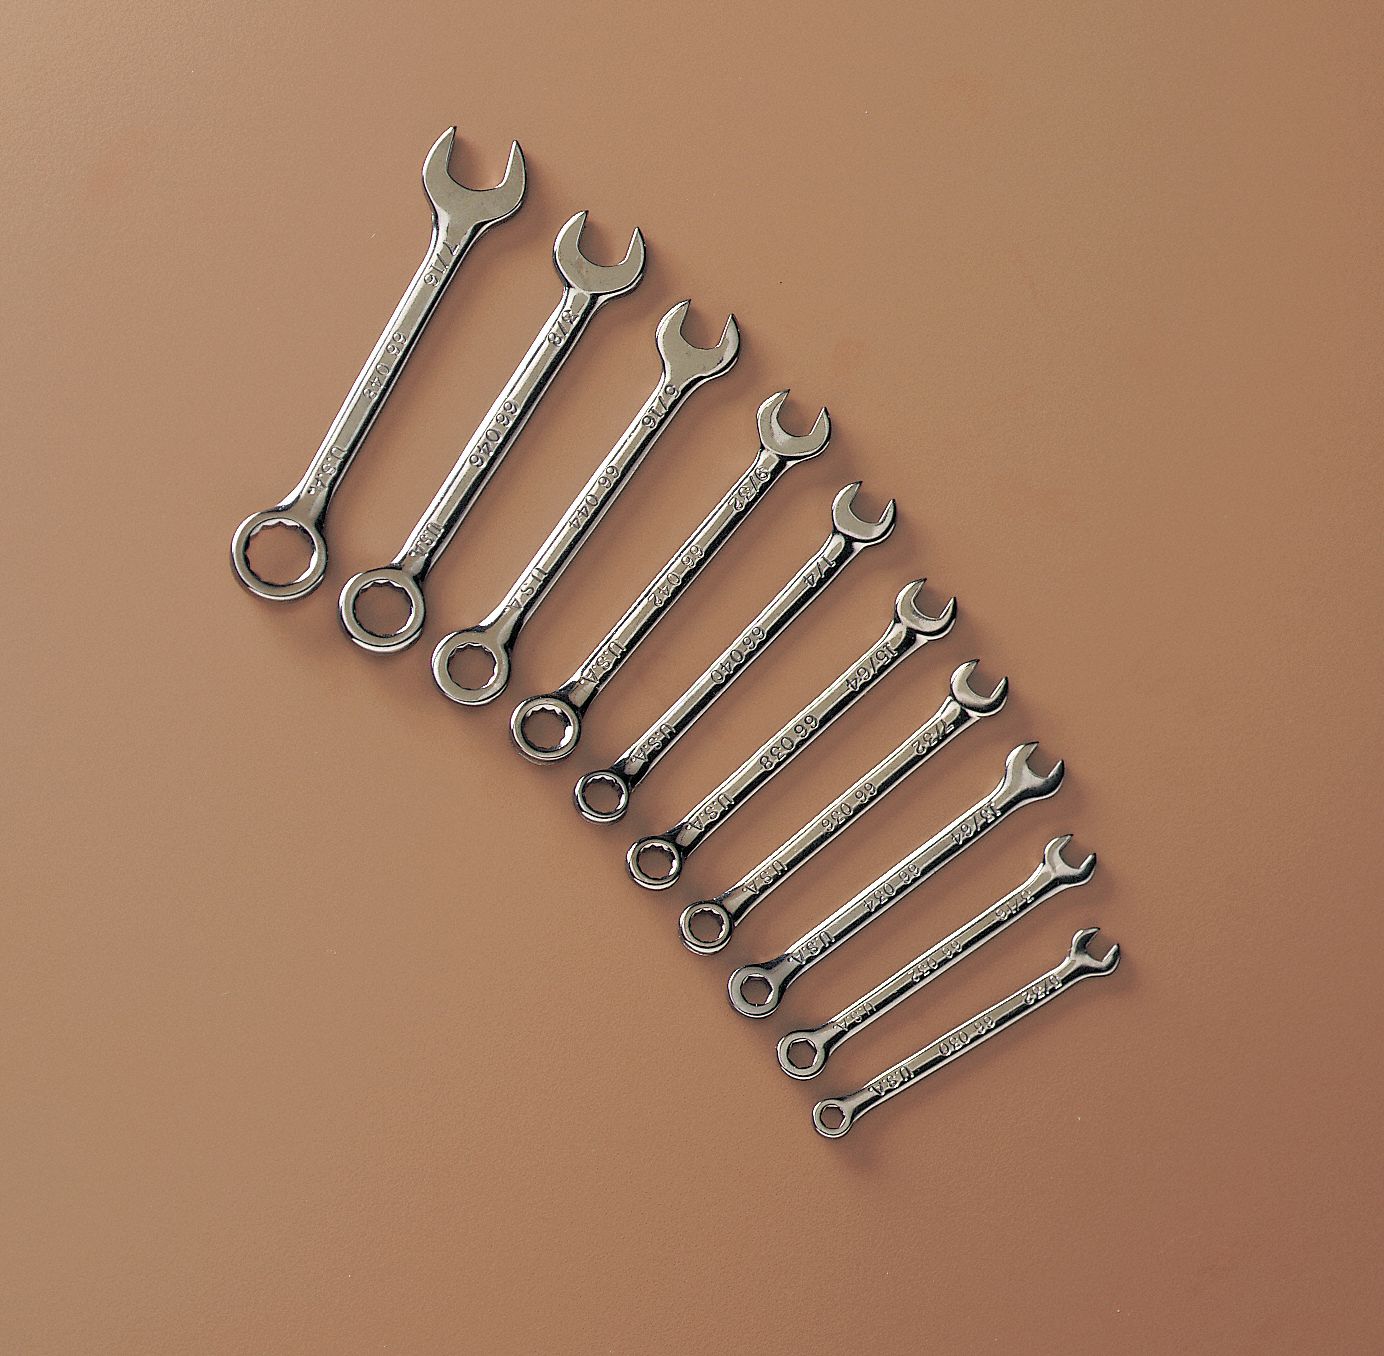 Combo Wrench Set,Polish,5/32-7/16in,10Pc